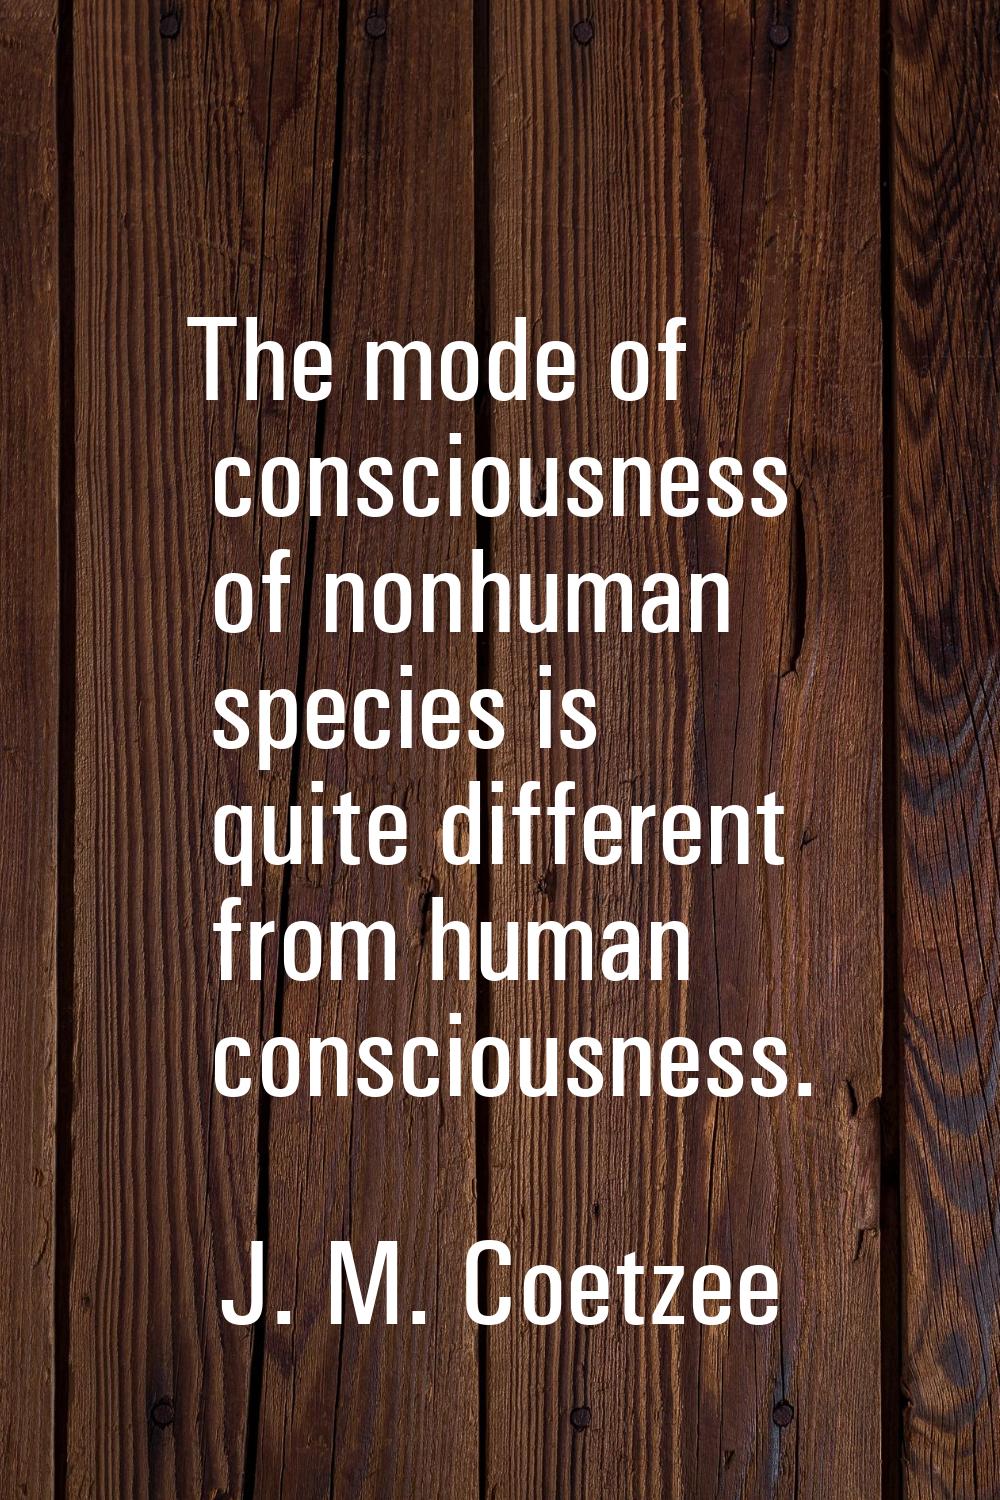 The mode of consciousness of nonhuman species is quite different from human consciousness.